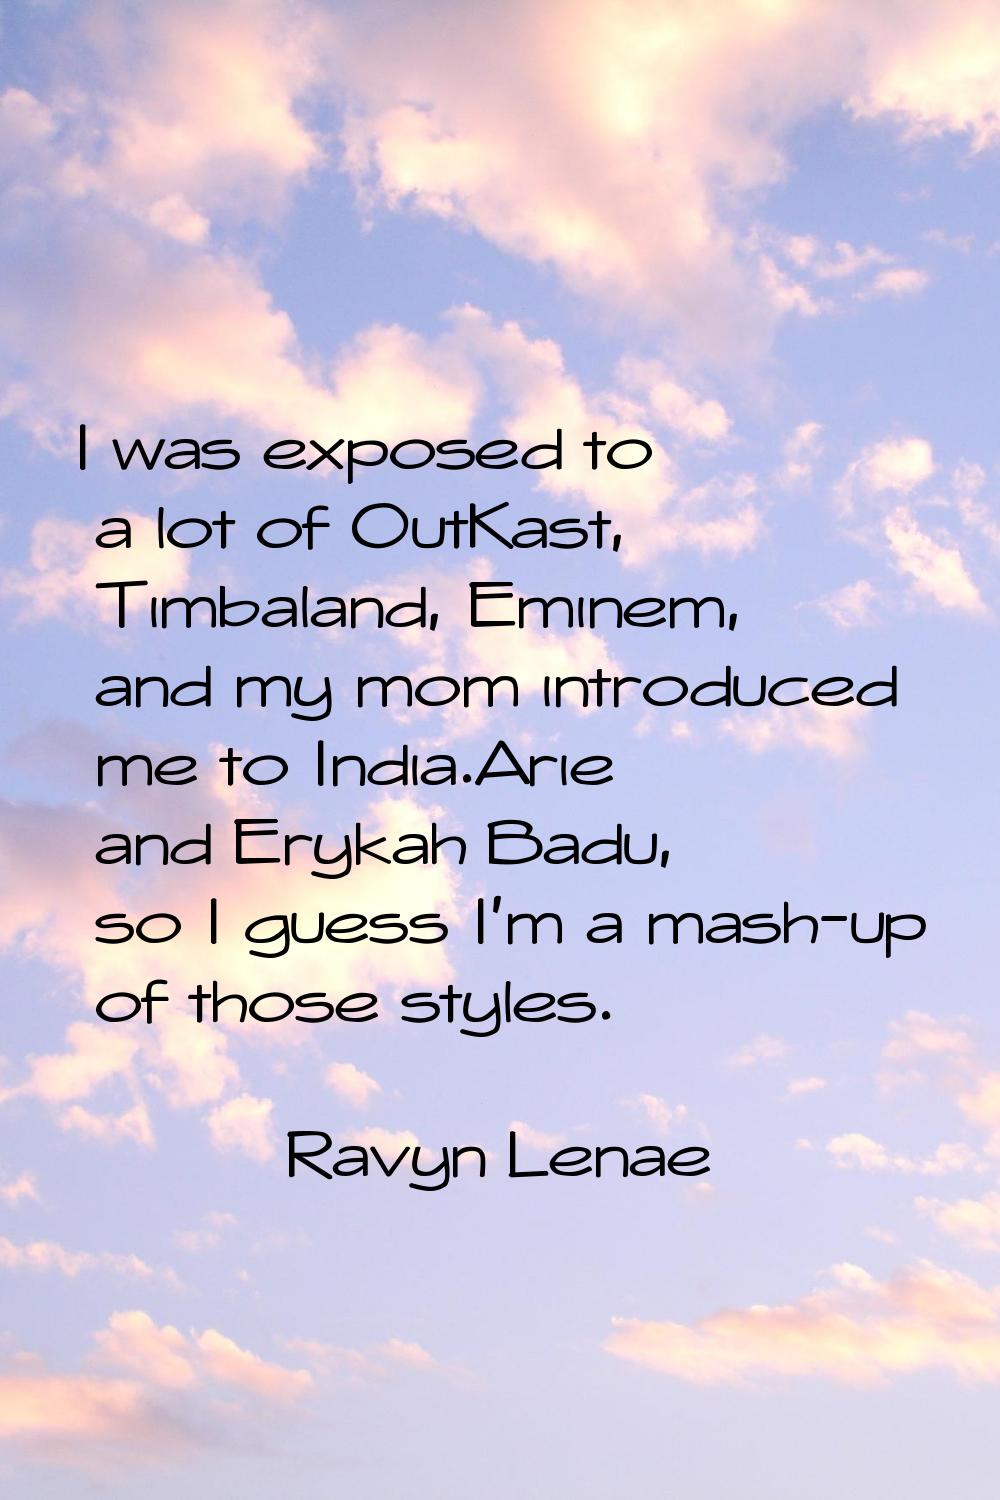 I was exposed to a lot of OutKast, Timbaland, Eminem, and my mom introduced me to India.Arie and Er